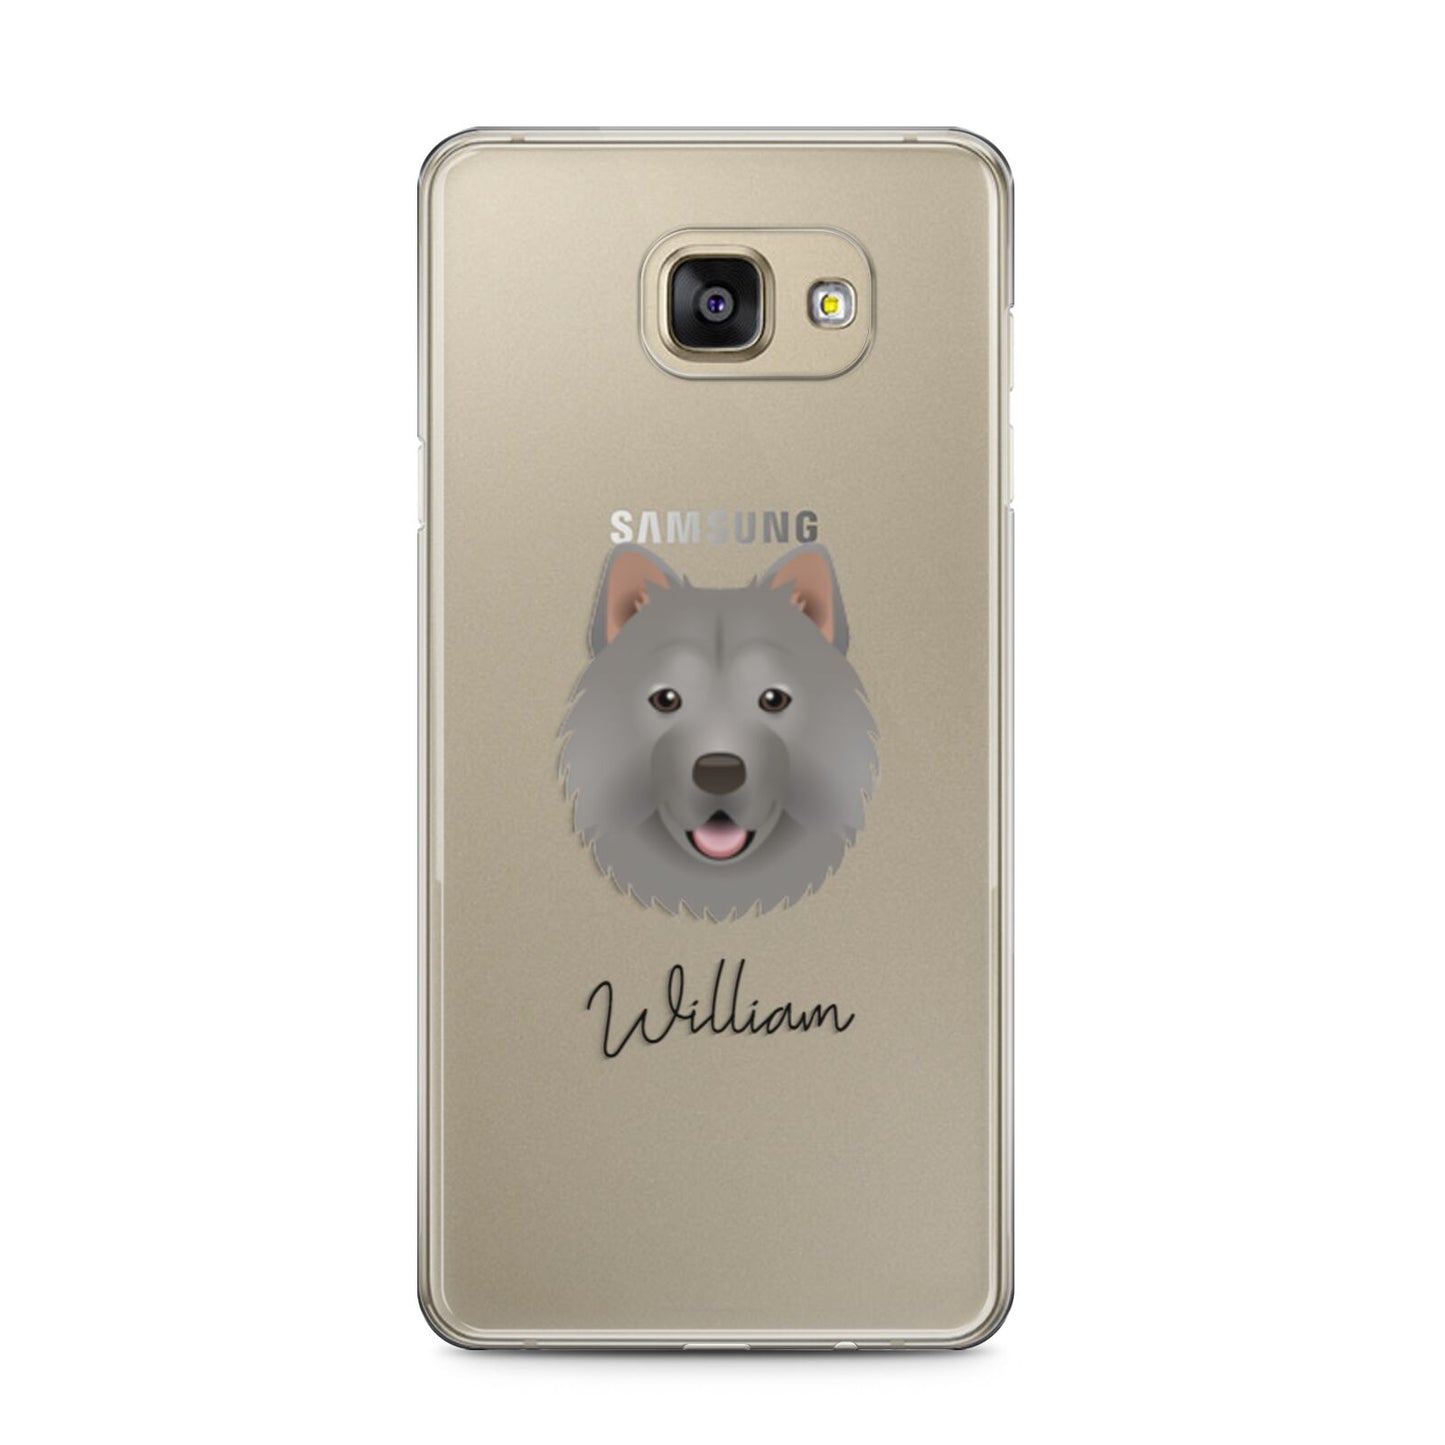 Chusky Personalised Samsung Galaxy A5 2016 Case on gold phone